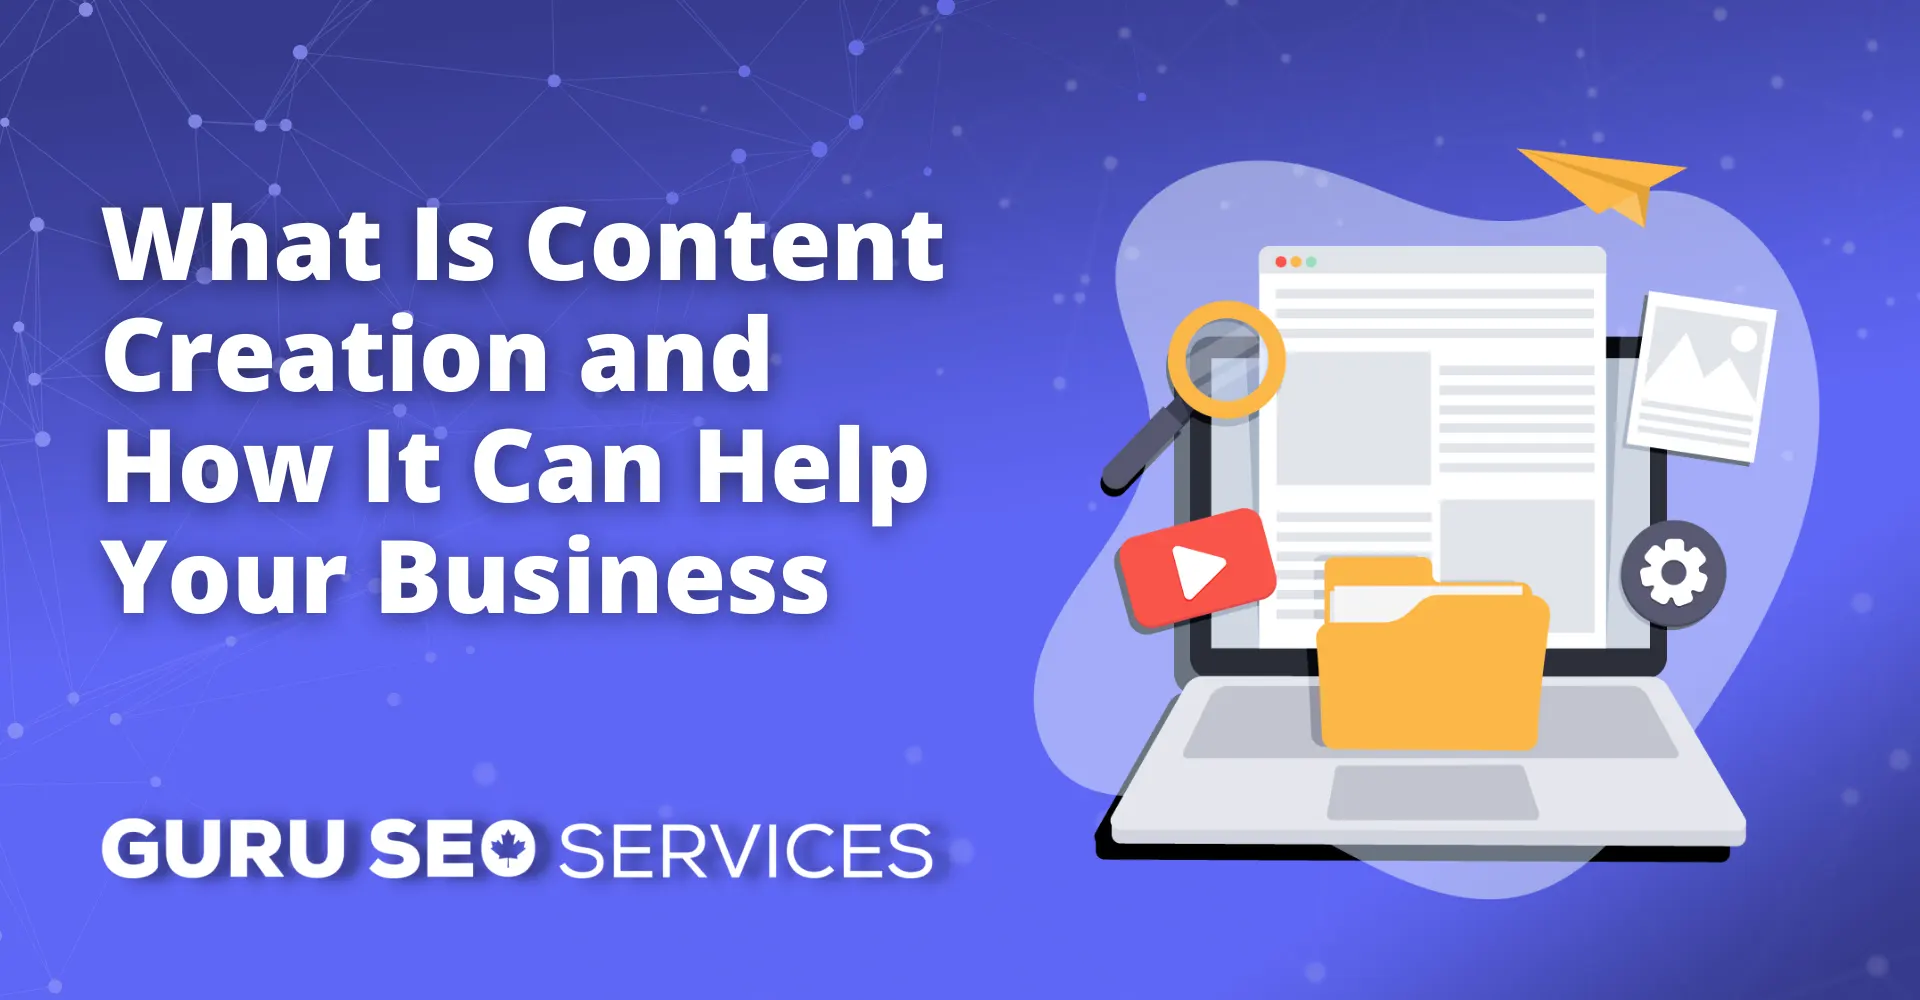 Content creation is the process of generating and distributing valuable and relevant material to attract a target audience. It plays a crucial role in elevating a business's online presence and engaging potential customers.